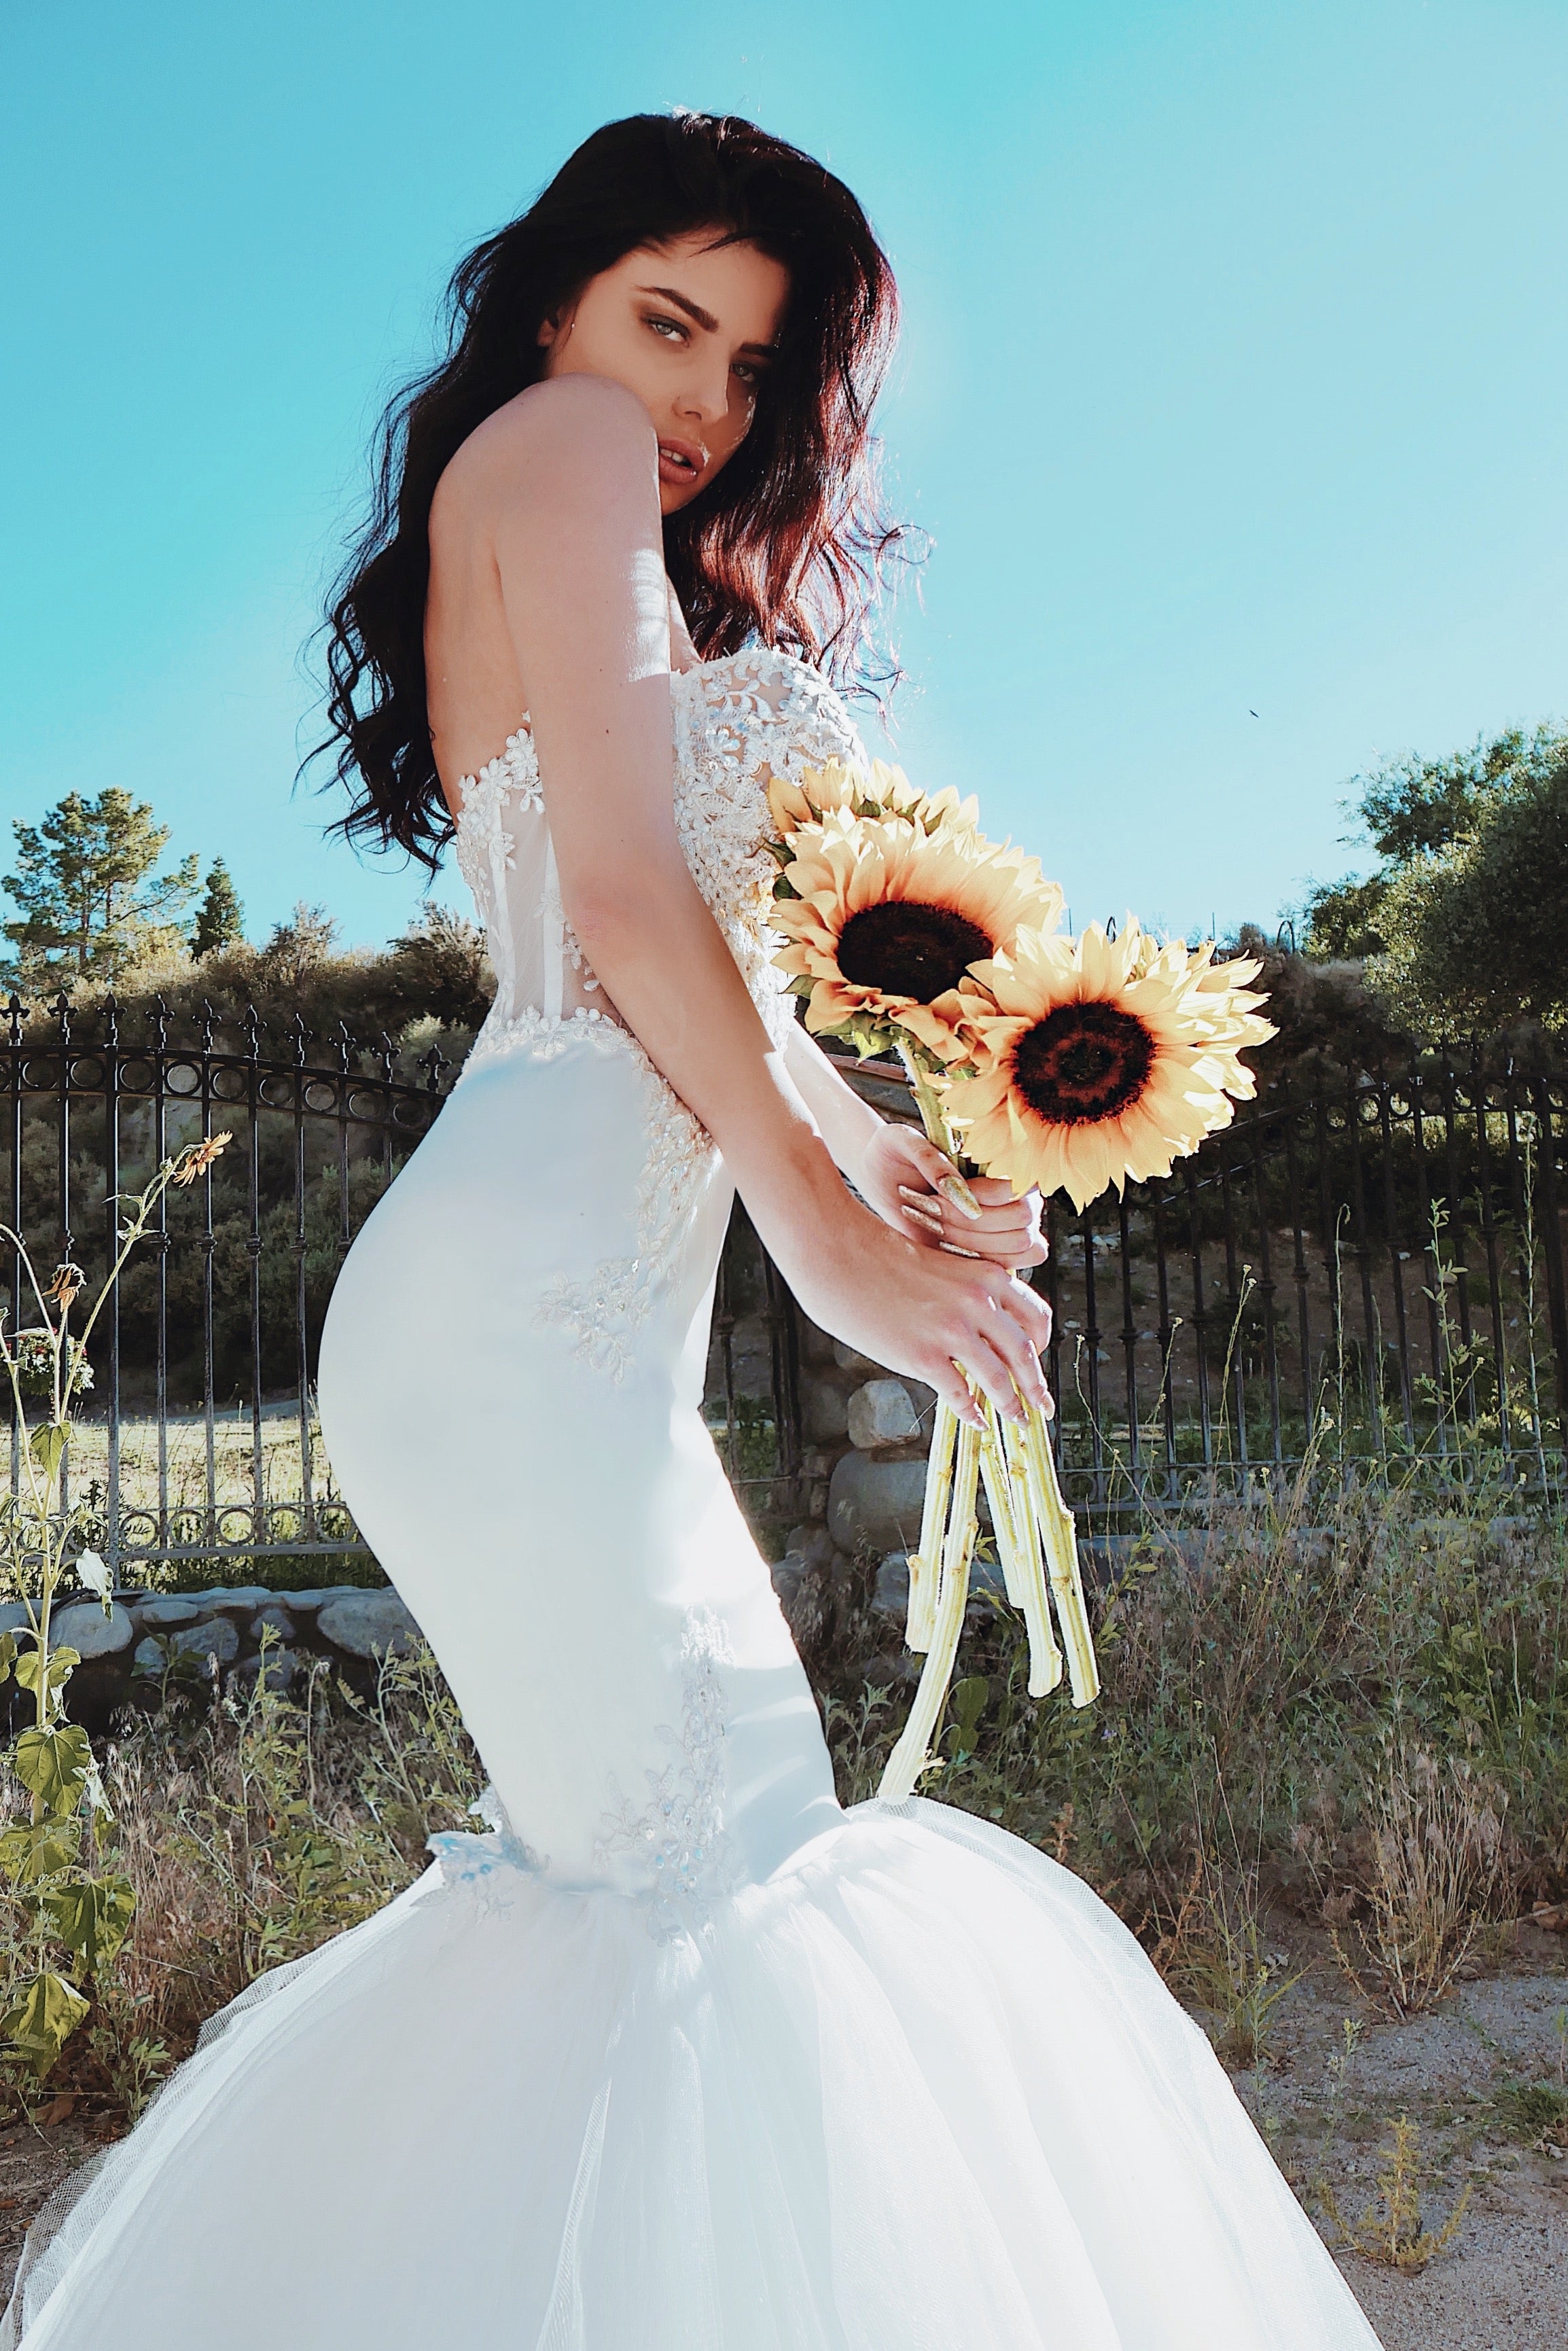 Lace applique wedding dress with satin hips and mermaid skirt holding sunflowers